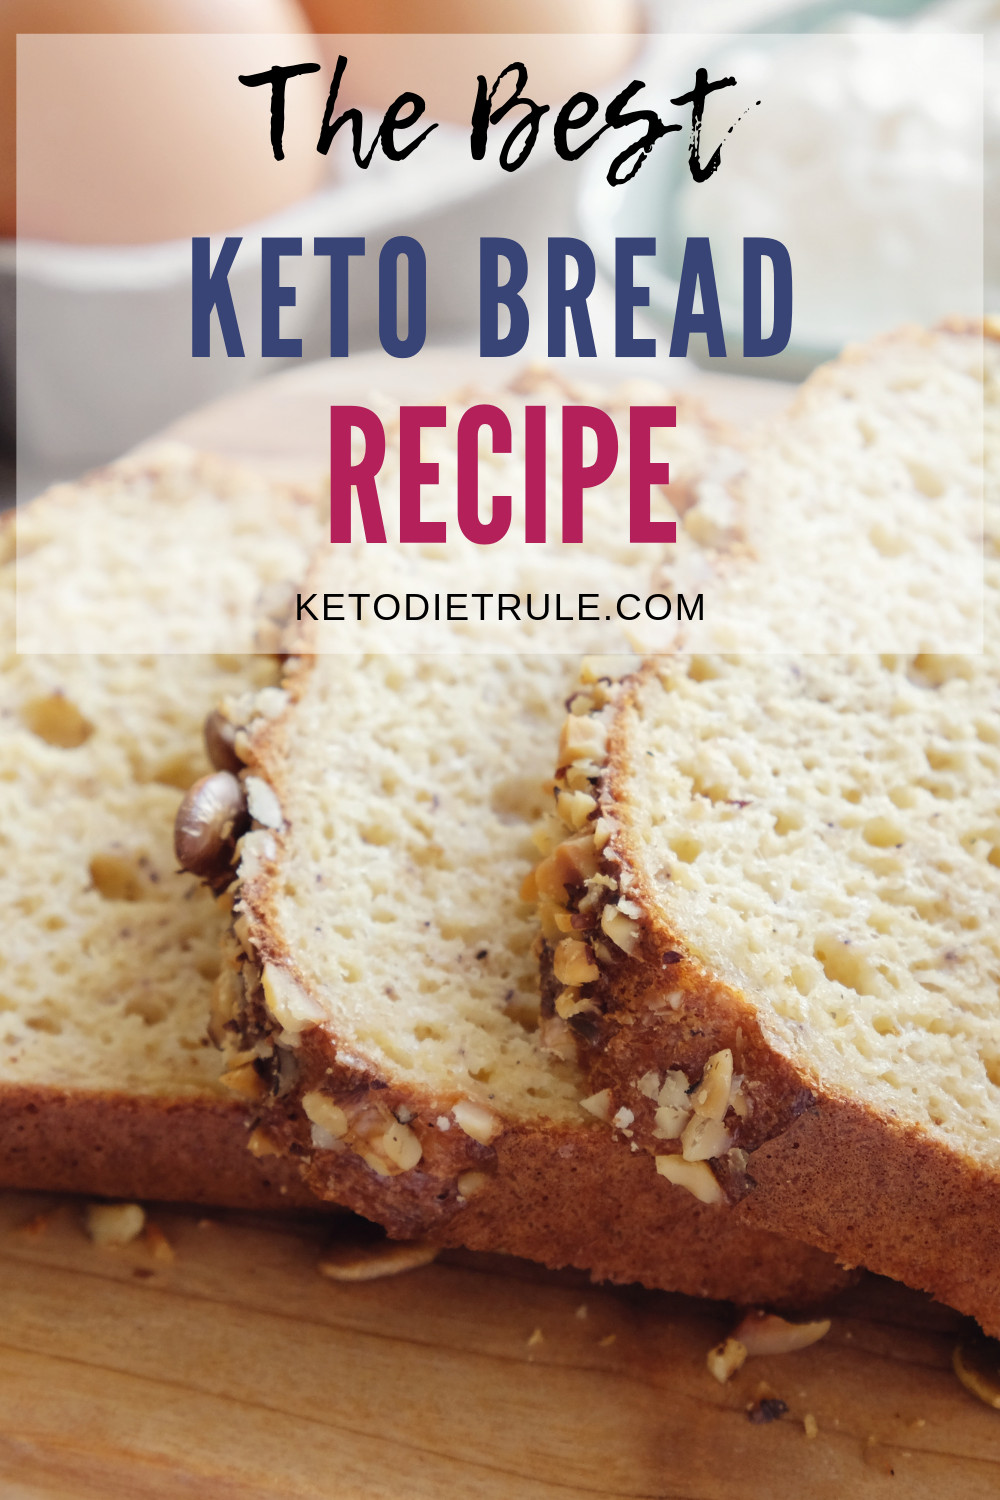 Keto Banana Bread Almond Meal
 Almond Flour Low Carb Bread for the Keto Diet